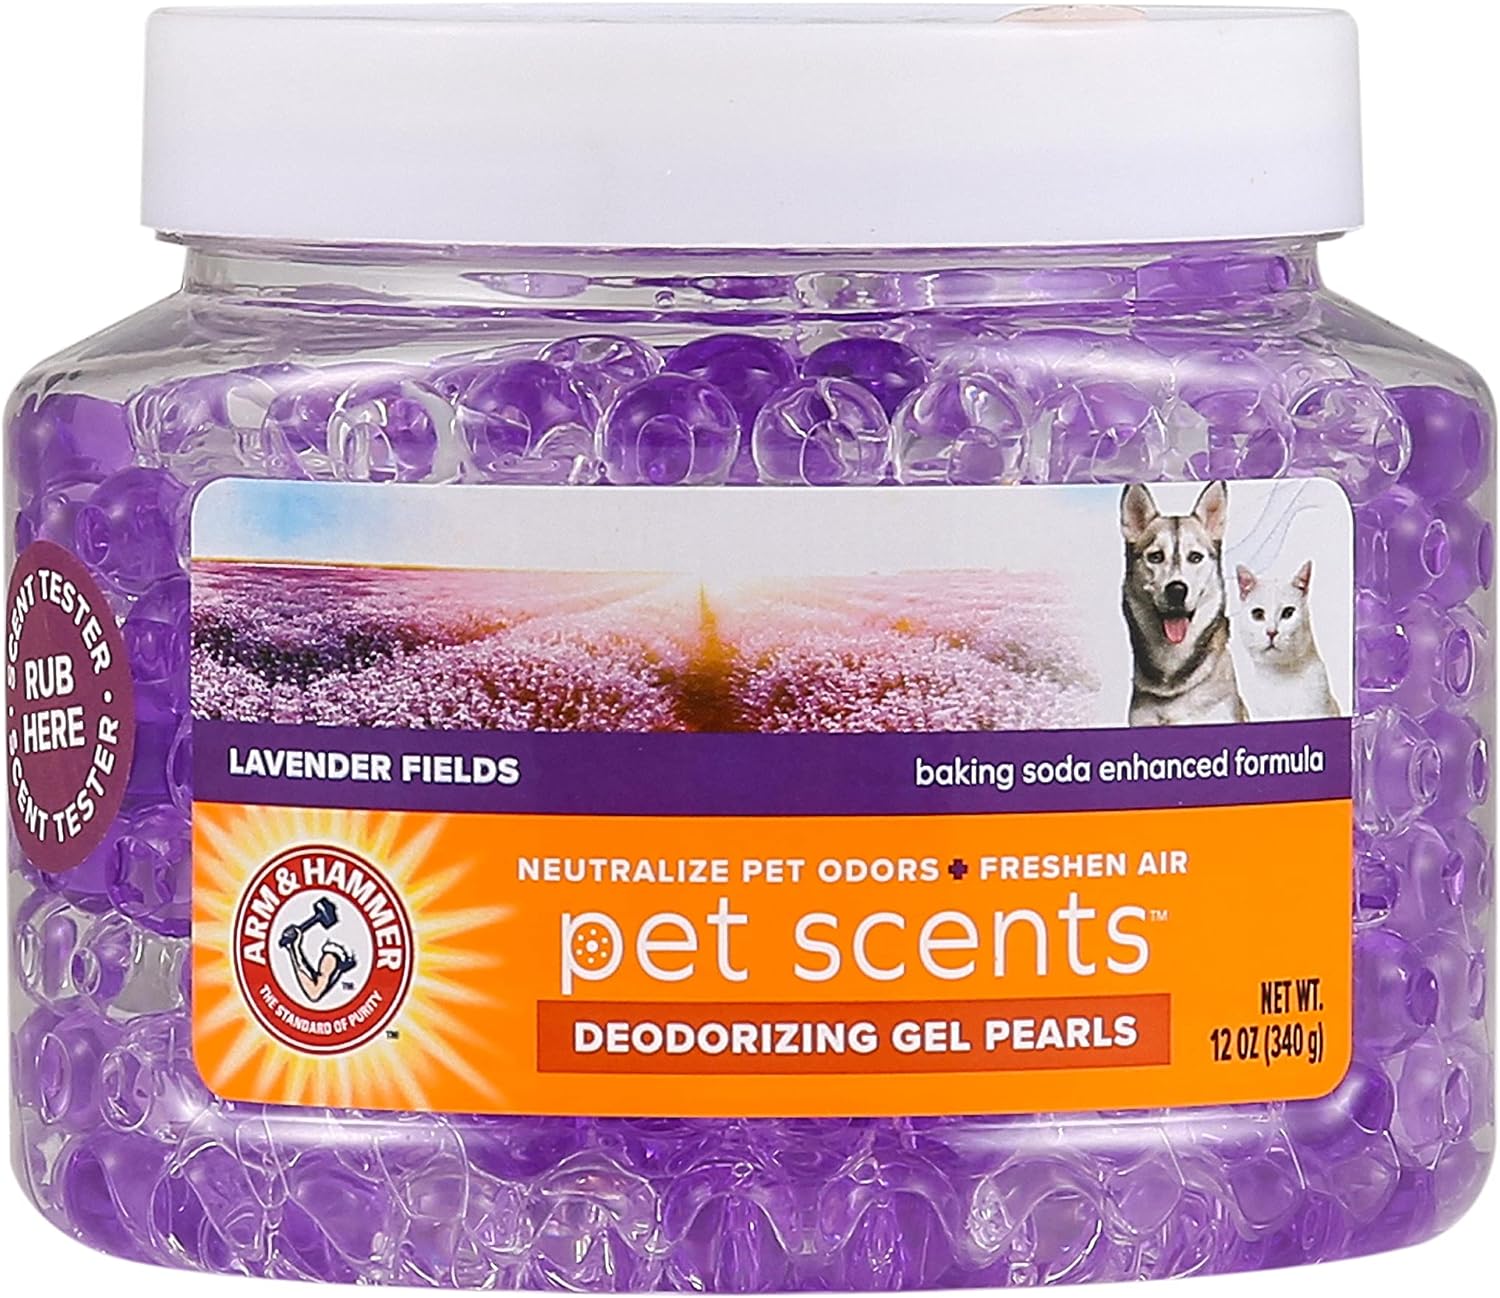 Arm & Hammer Air Care Pet Scents Deodorizing Gel Beads in Lavender Fields